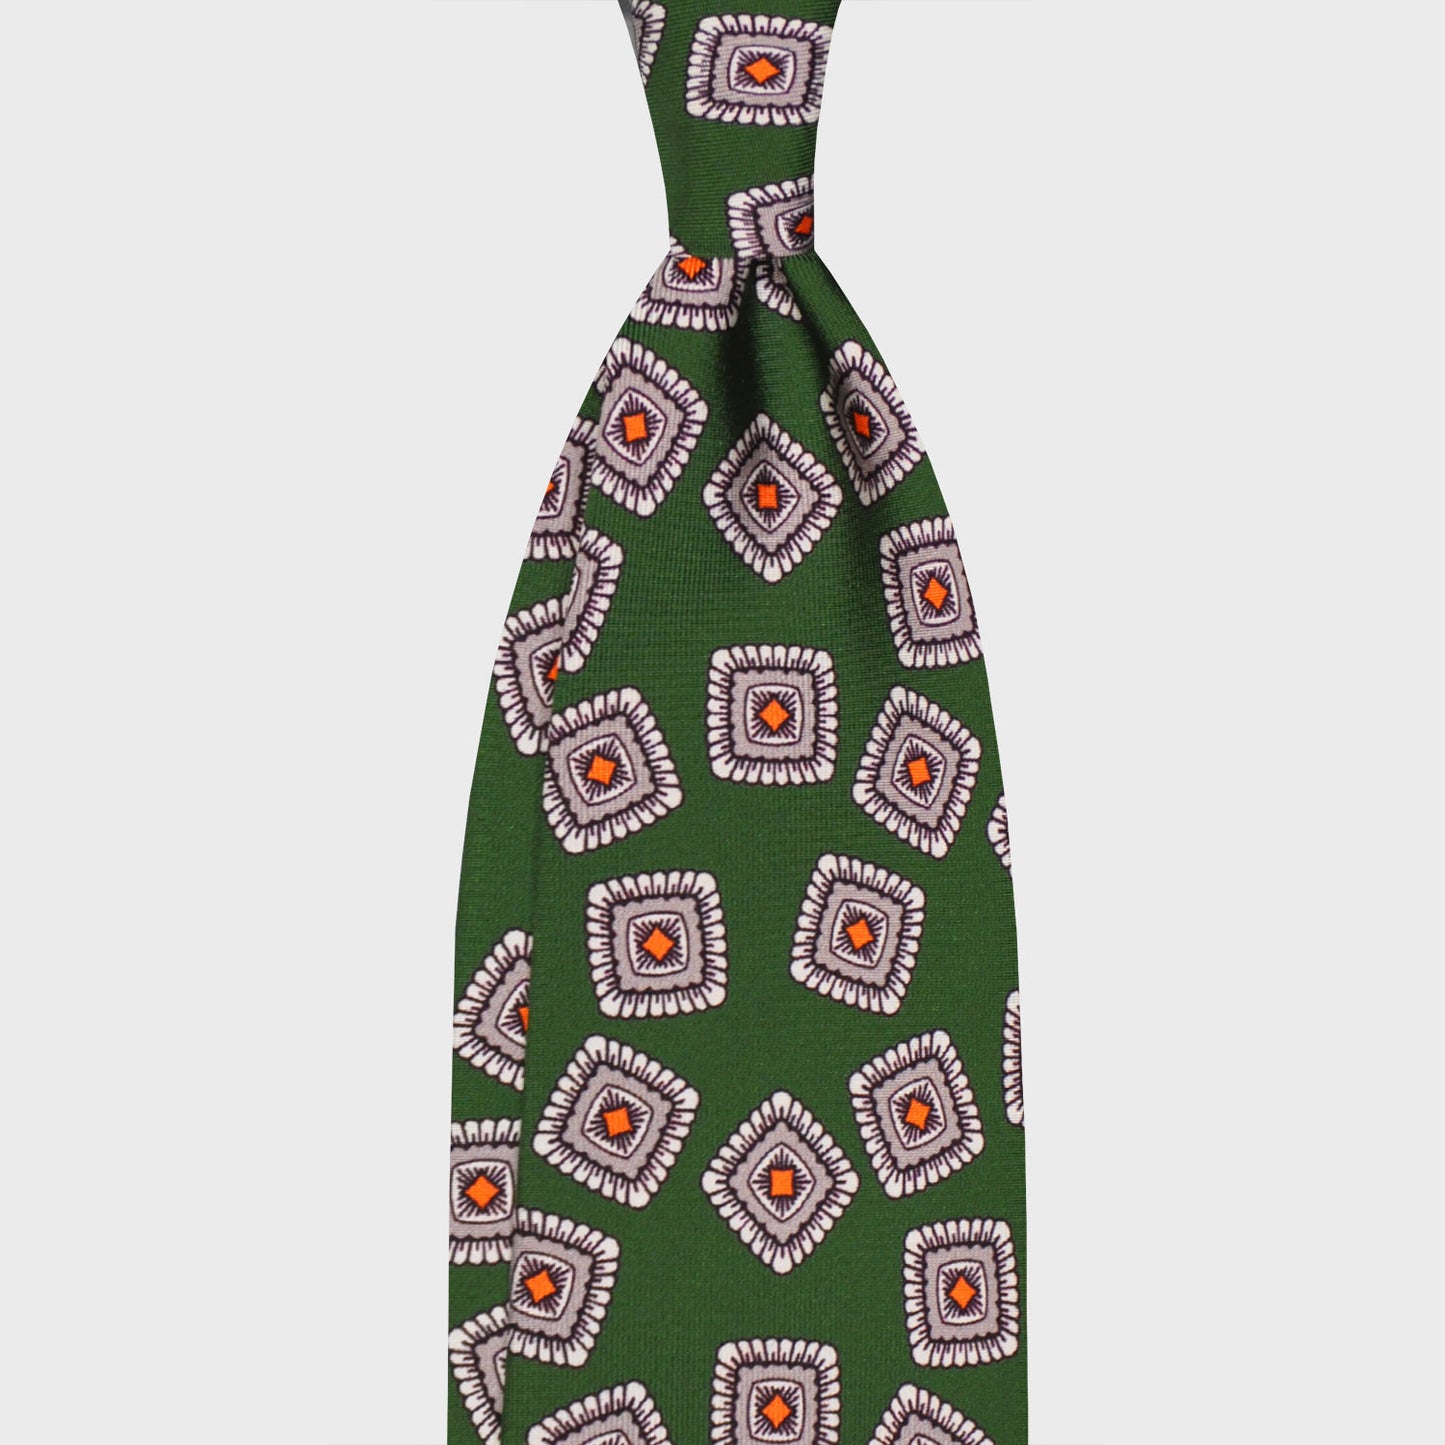 Pine Green Silk Tie Unlined Classic Medallions. Elegant blue silk tie, pine green background with grey and orange medallions pattern, handmade in Italy F.Marino Napoli tie for Wools Boutique Uomo